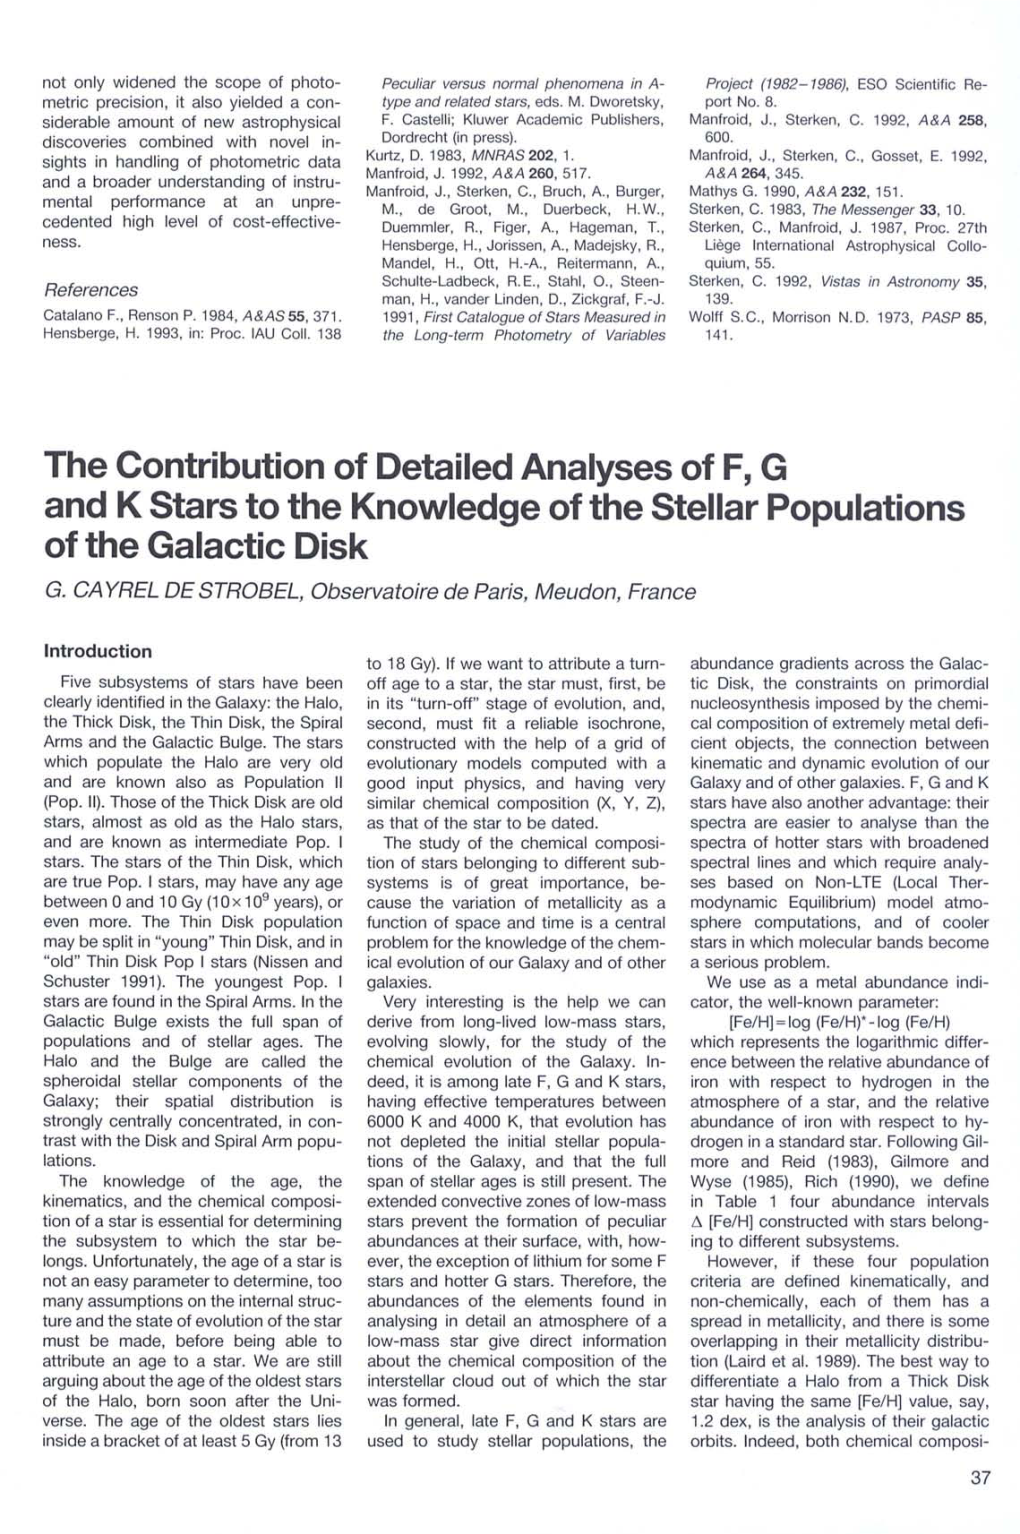 The Contribution of Detailed Analyses of F, G and K Stars to the Knowledge of the Stellar Populations of the Galactic Disk G